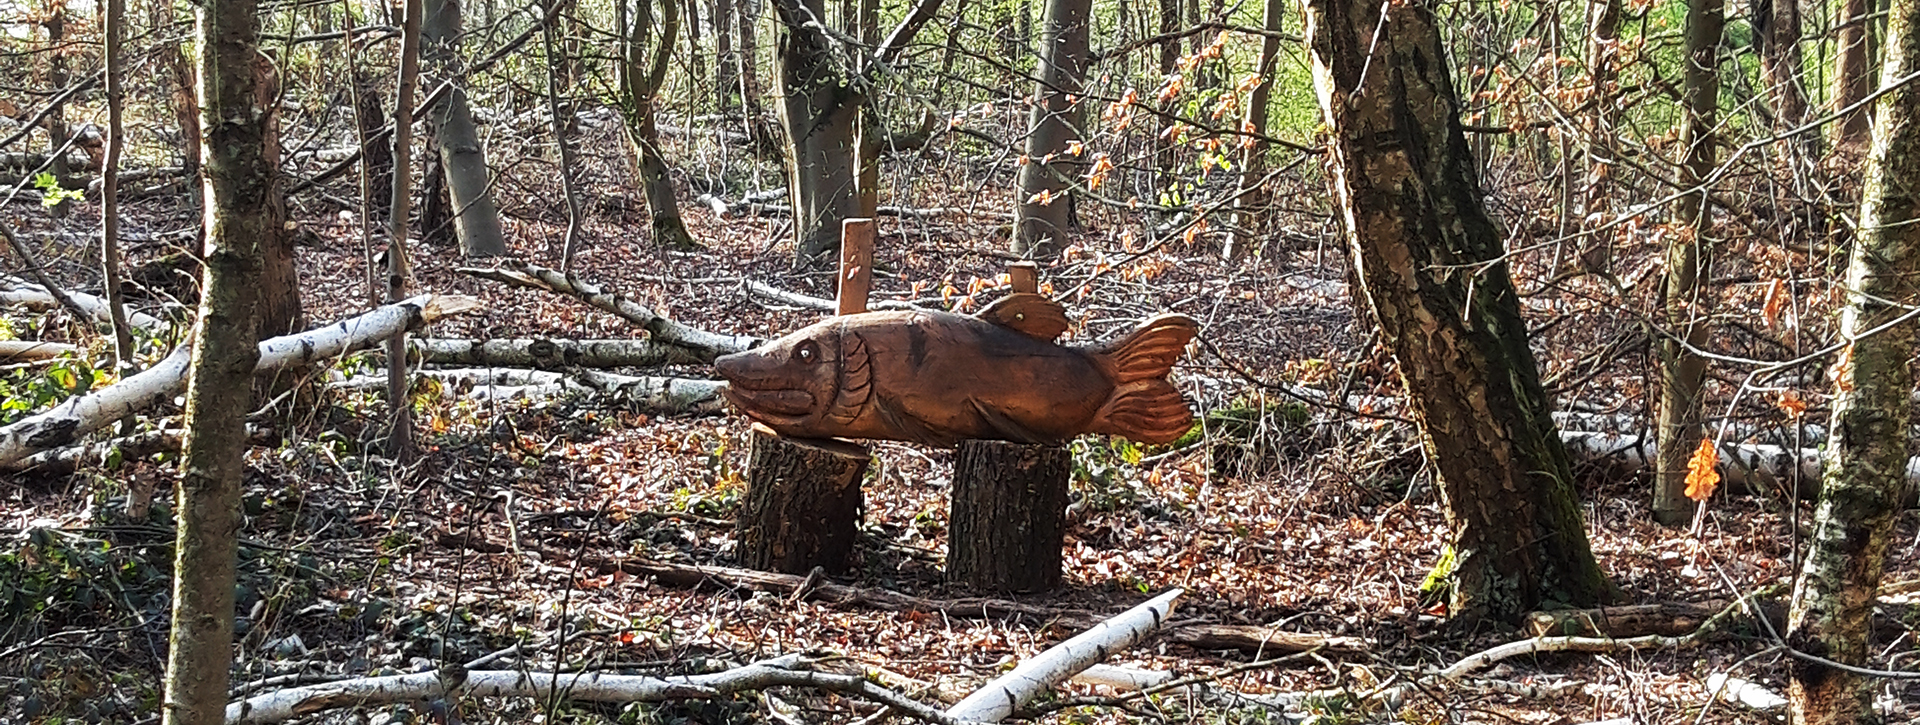 Fish carved from wood lies on two stumps